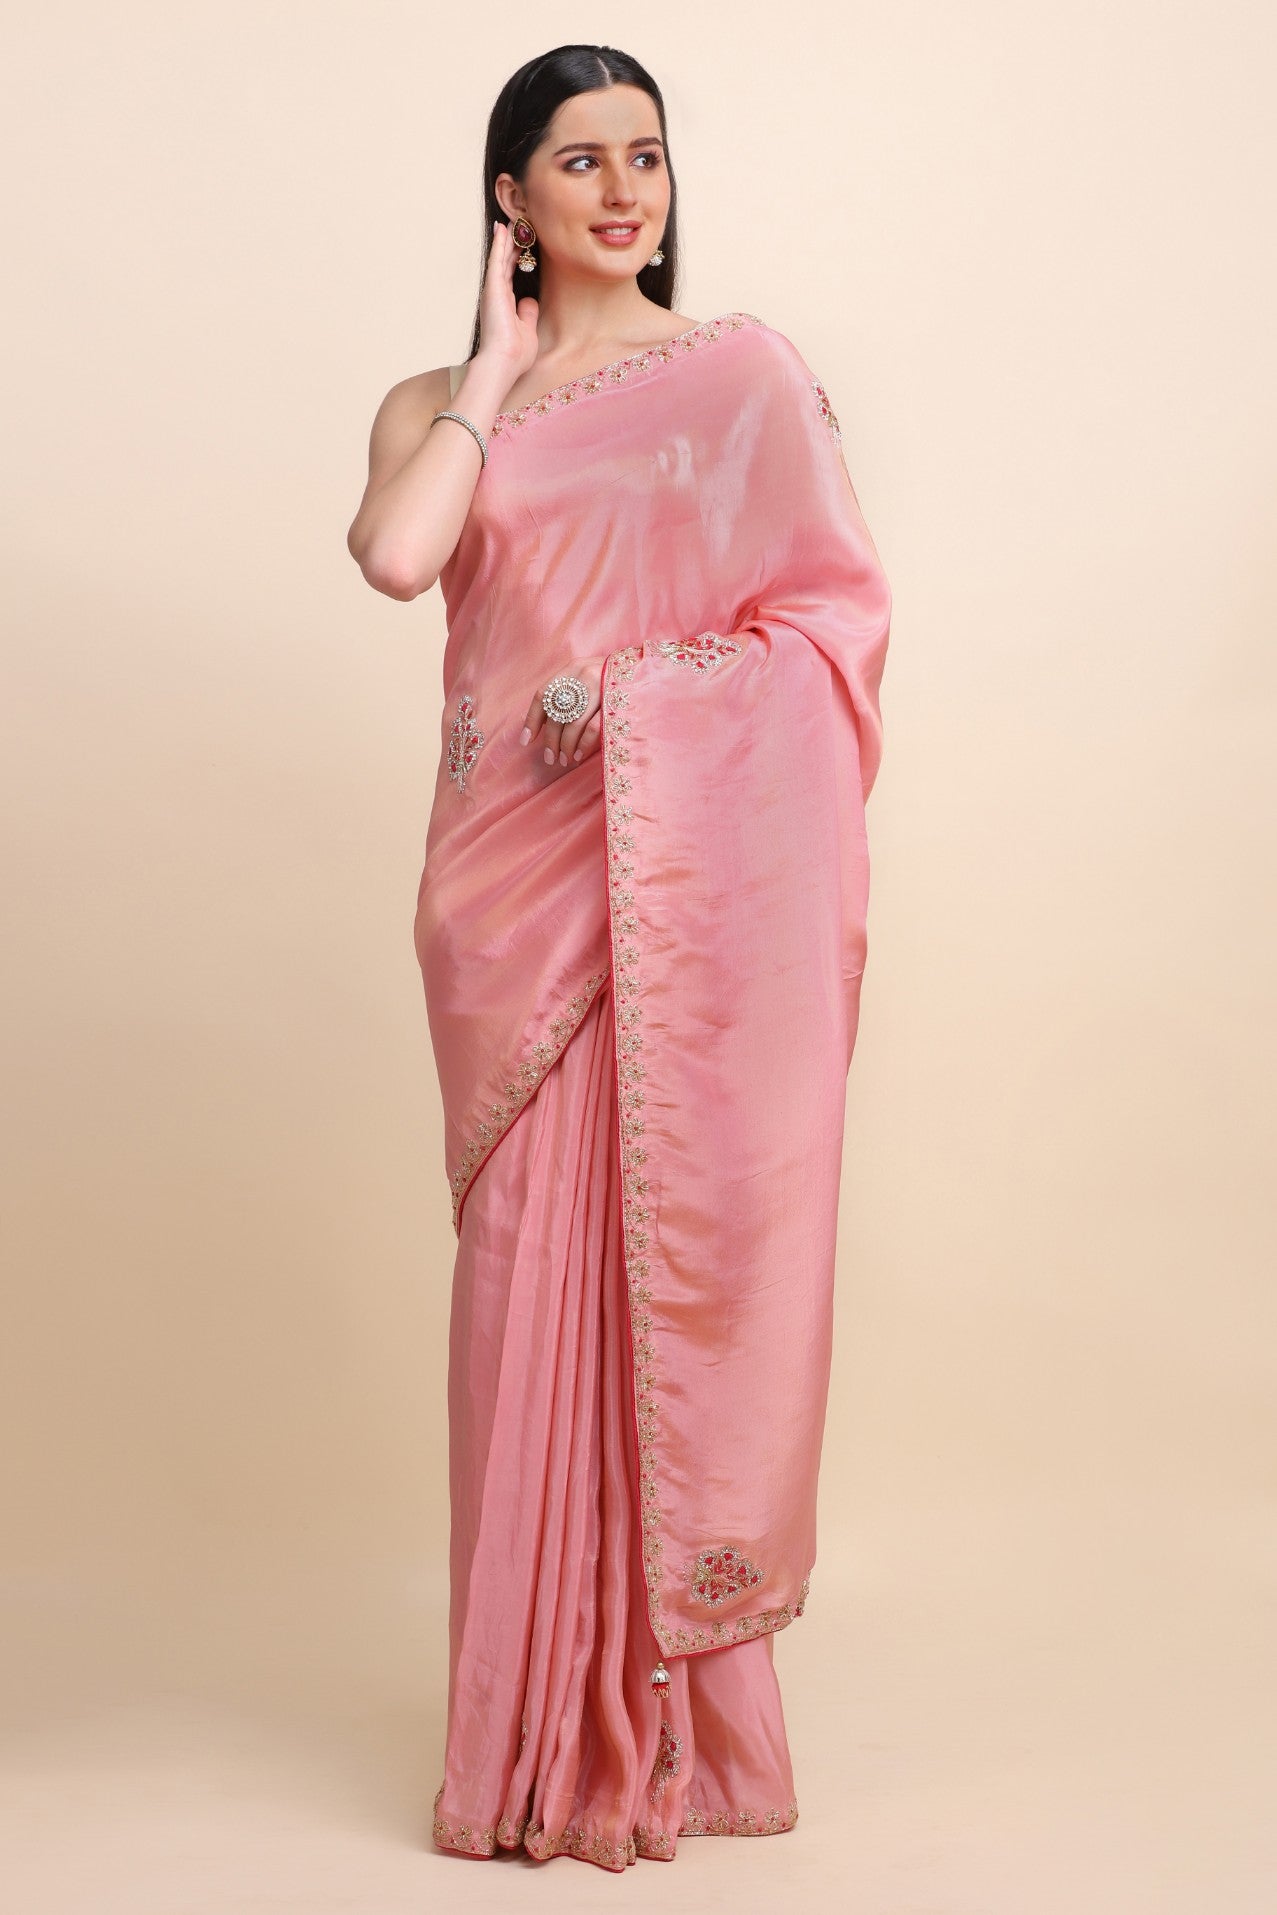 woman posing in pink embroidered saree